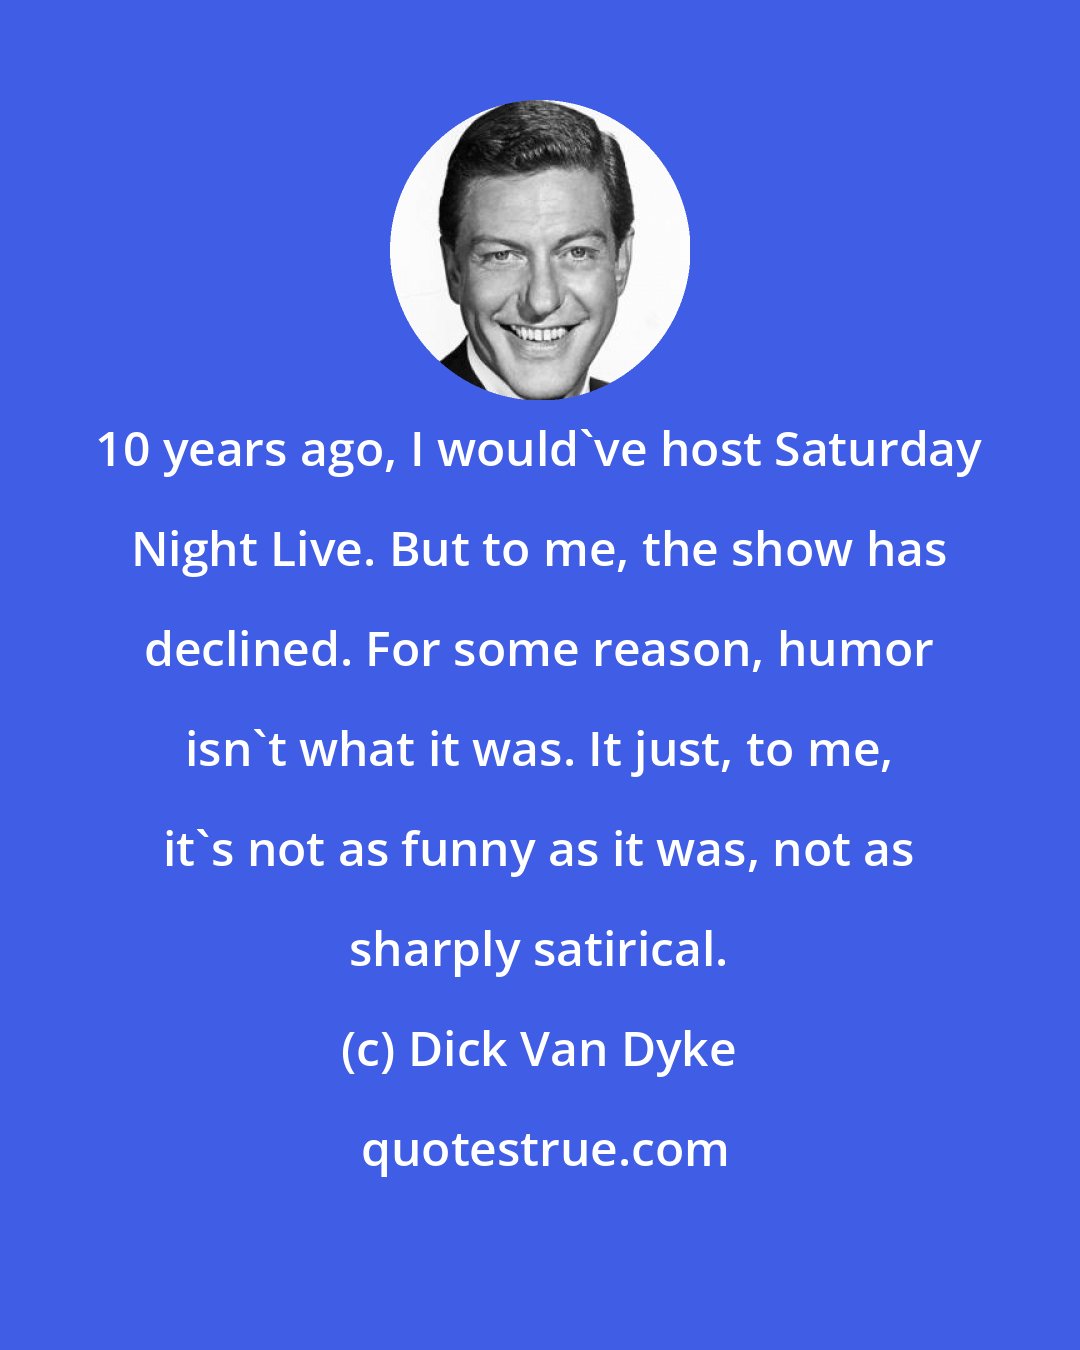 Dick Van Dyke: 10 years ago, I would've host Saturday Night Live. But to me, the show has declined. For some reason, humor isn't what it was. It just, to me, it's not as funny as it was, not as sharply satirical.